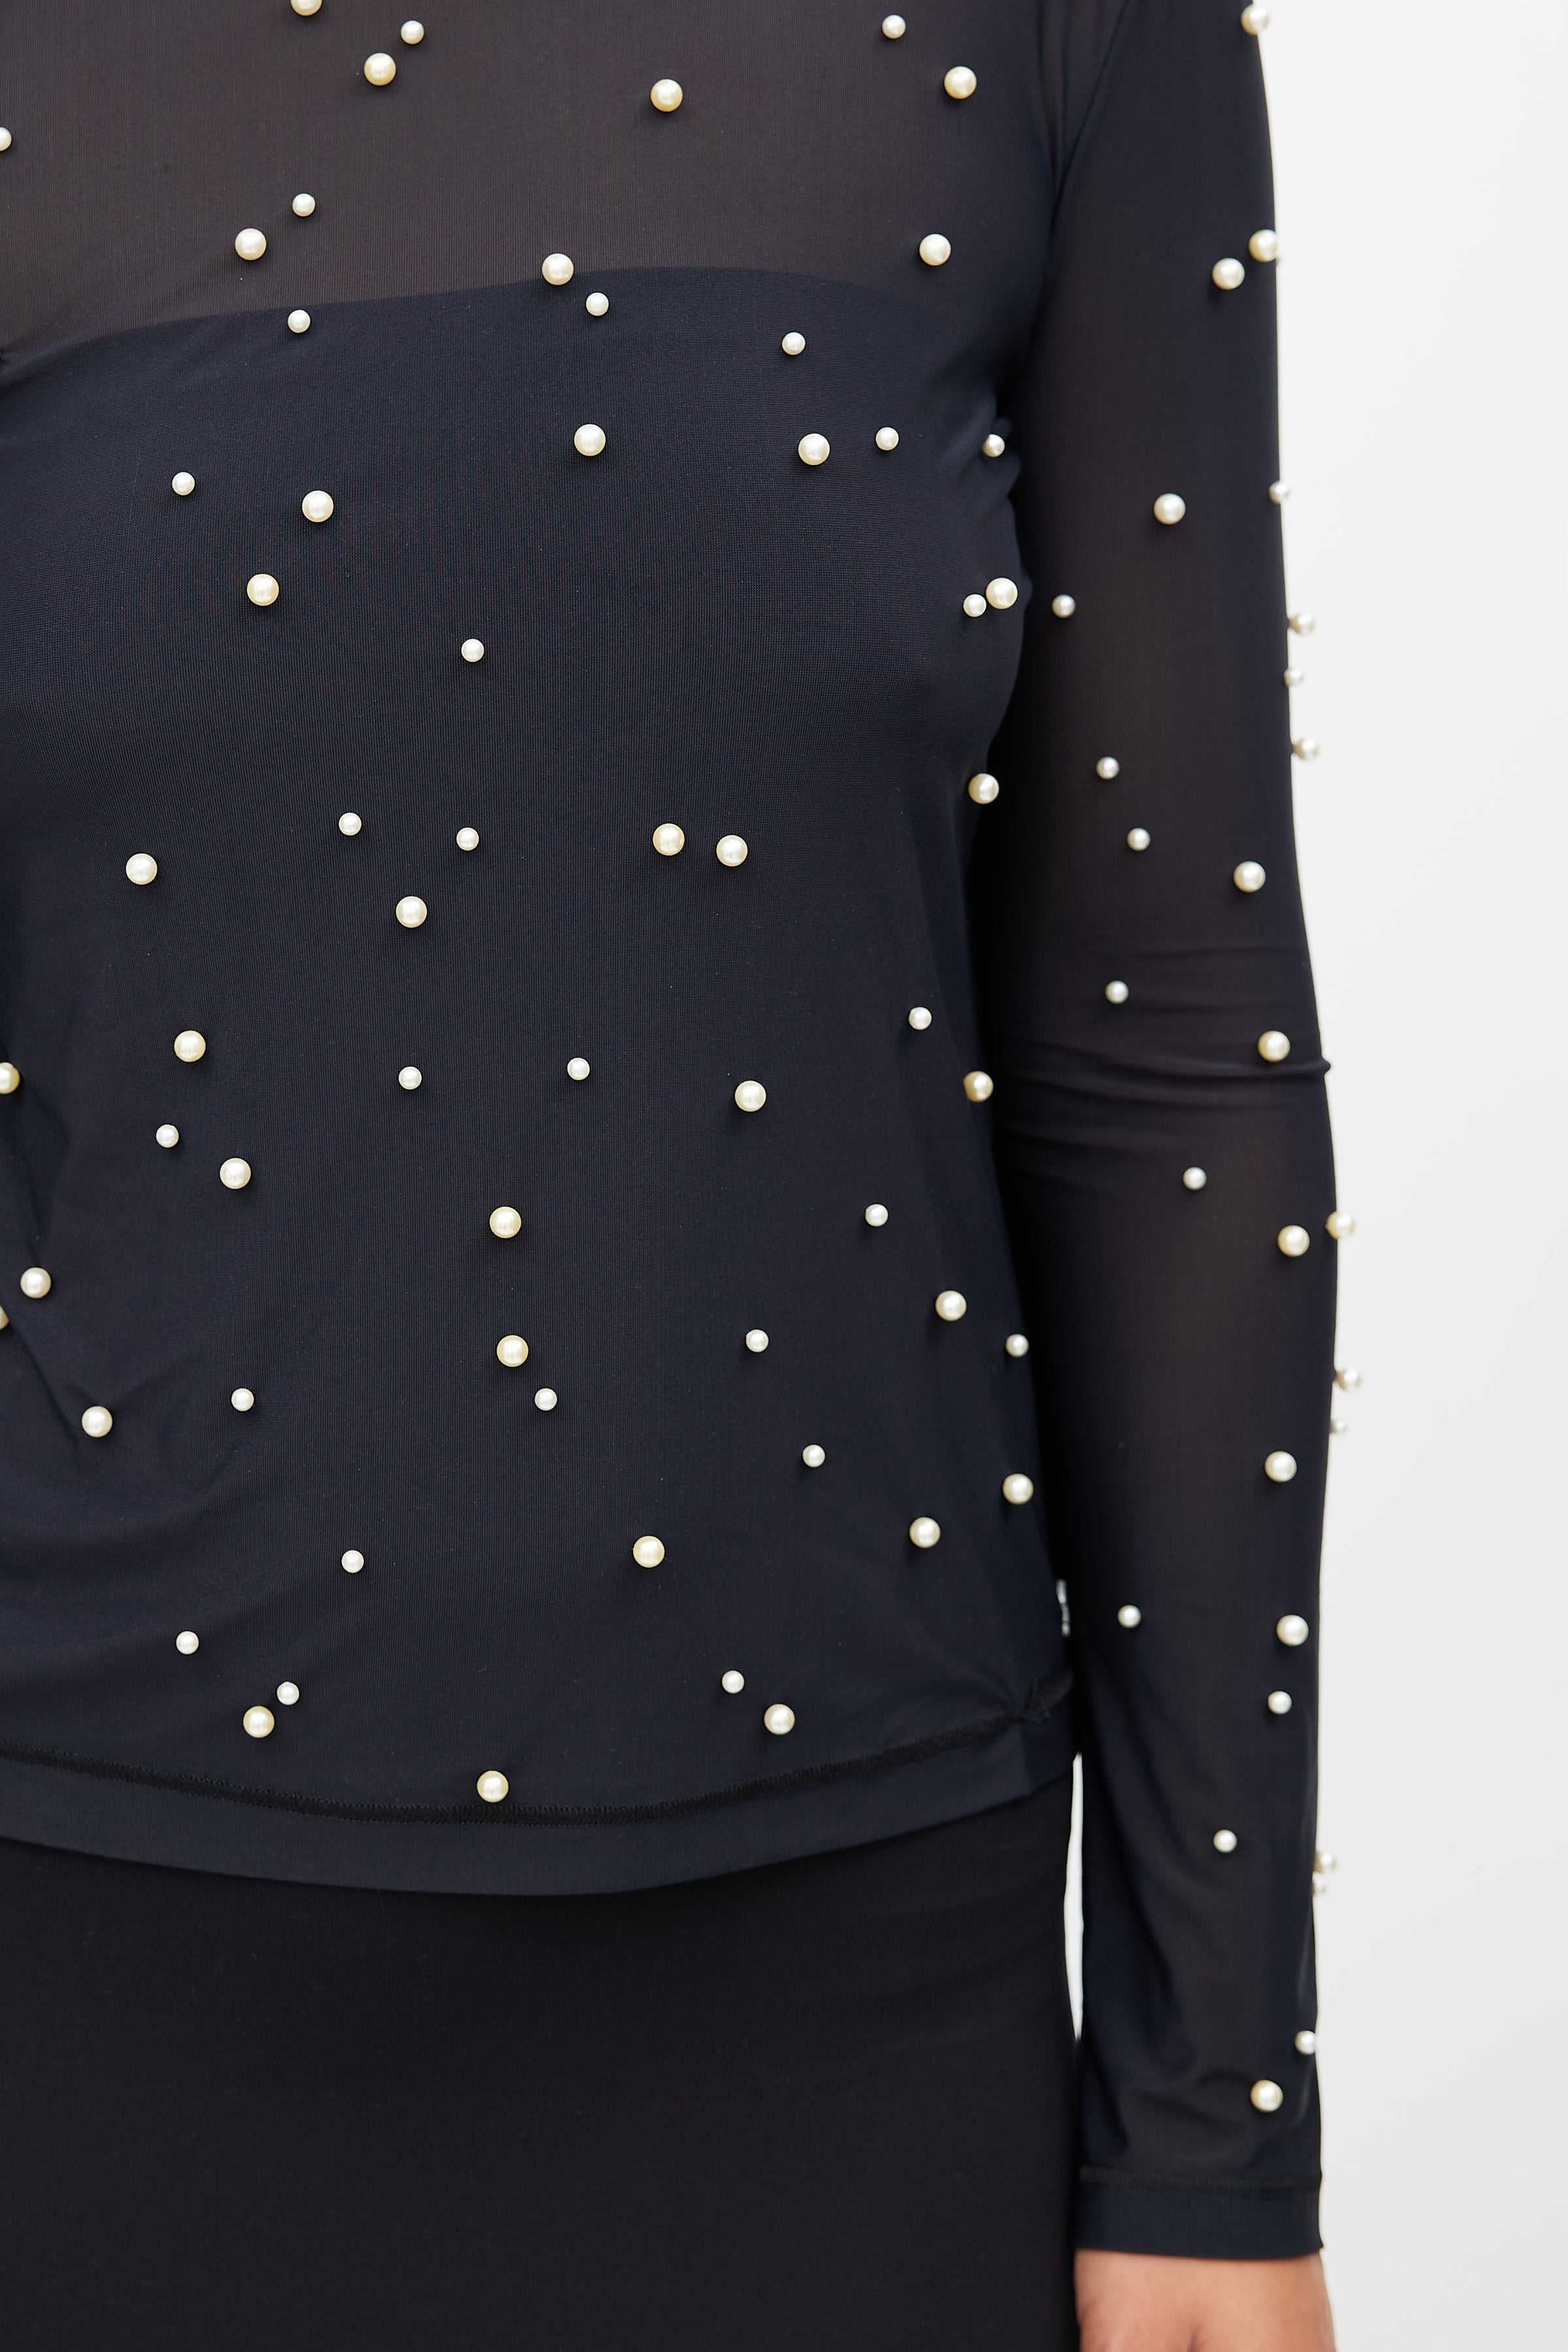 Chanel 2pc. Black w/ Pearl Buttons & Removable Blouse Detail